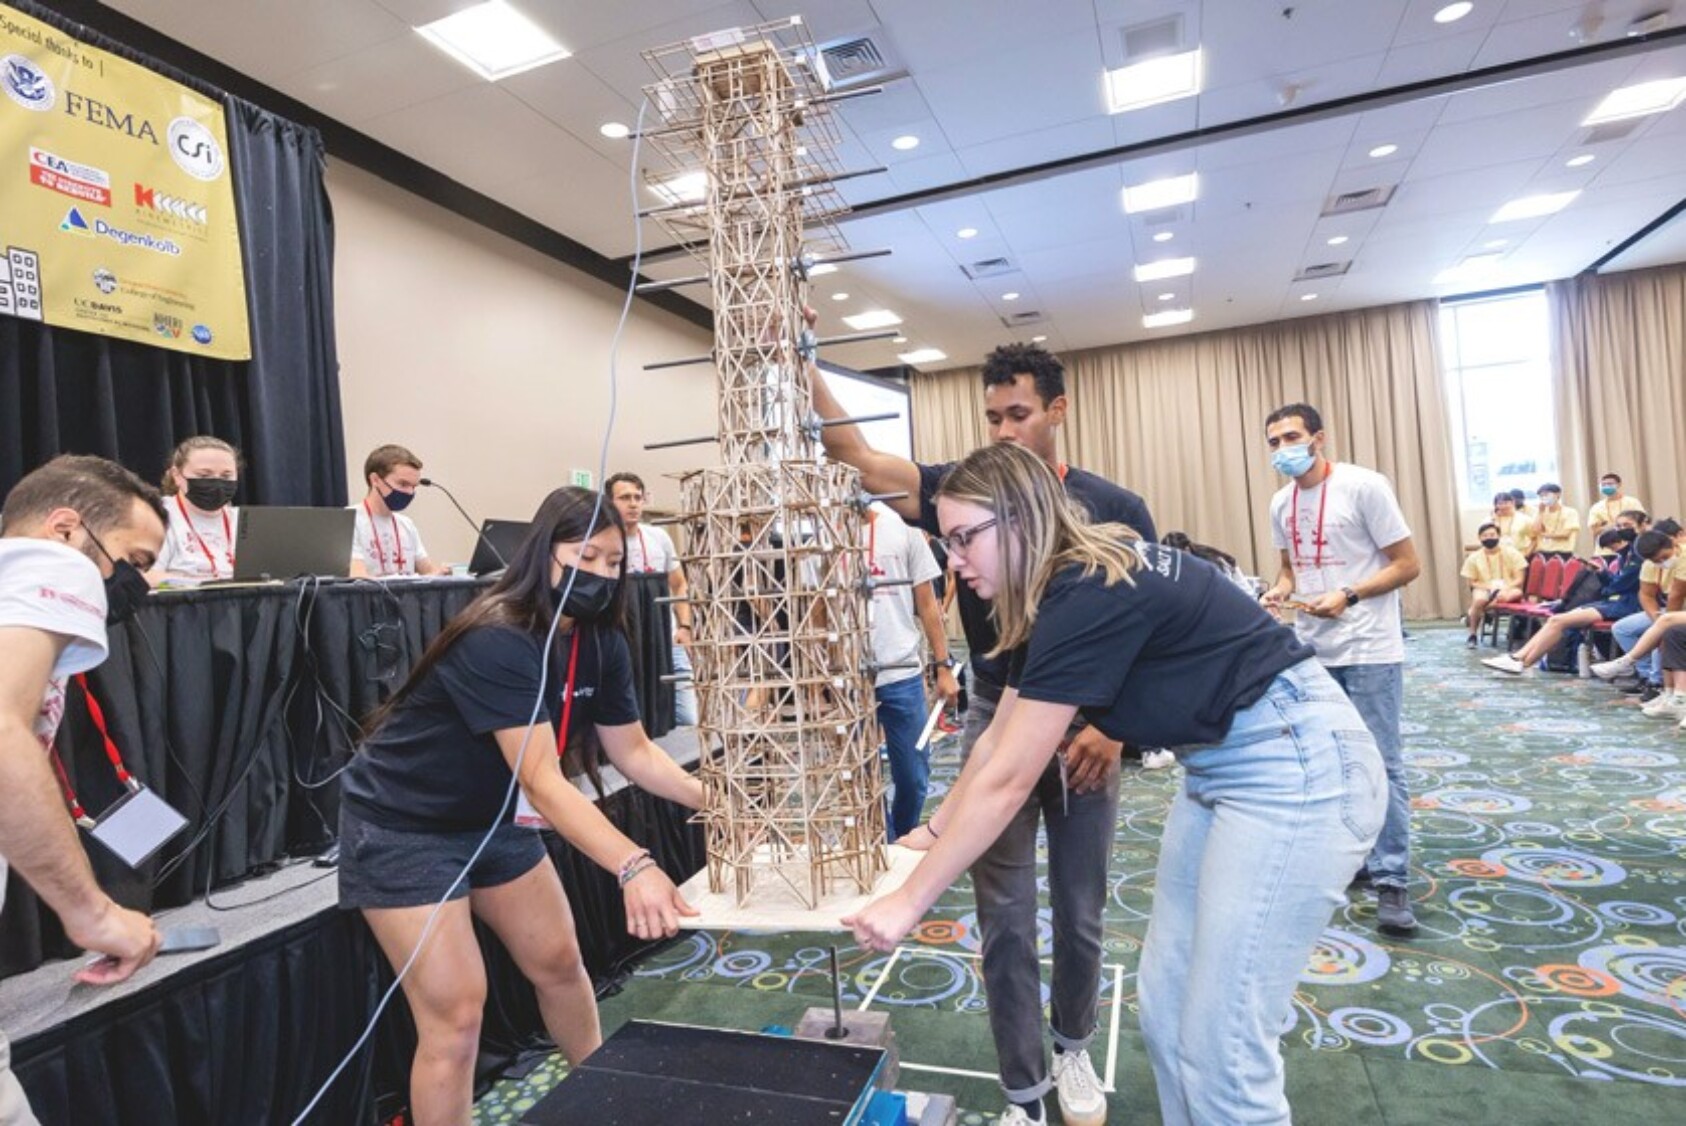 “We are passionate about designing safer structures for regions impacted by seismic activity. At the competition, our tower is scored on its architecture, building costs, presentation quality, and most importantly: if the structure survives the quake!” —Cornell Seismic Design team